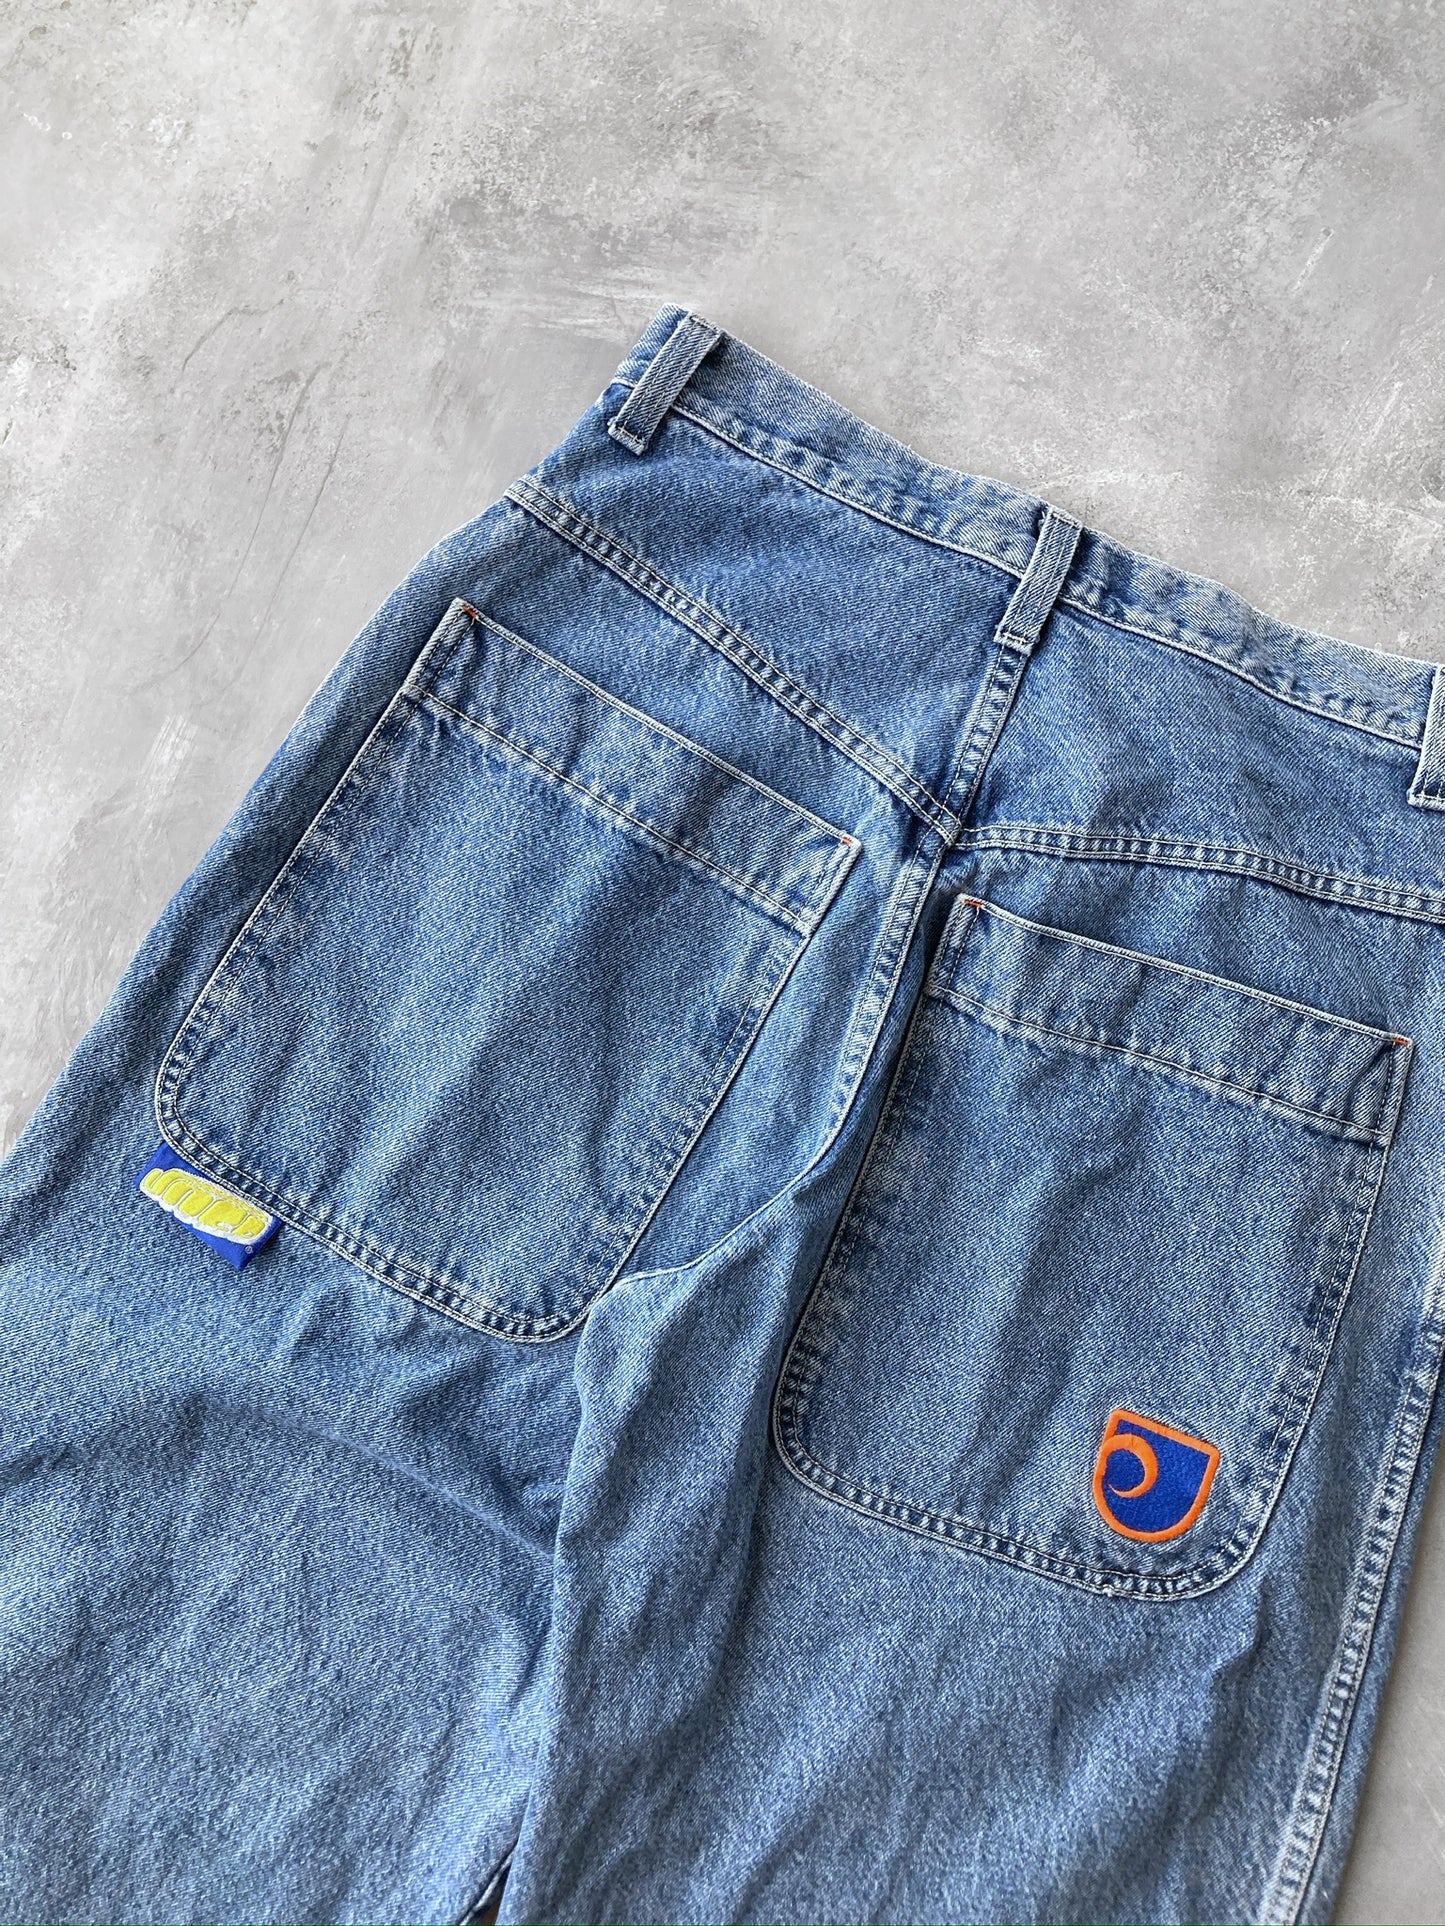 JNCO Cropped Jeans 90's - 33x25